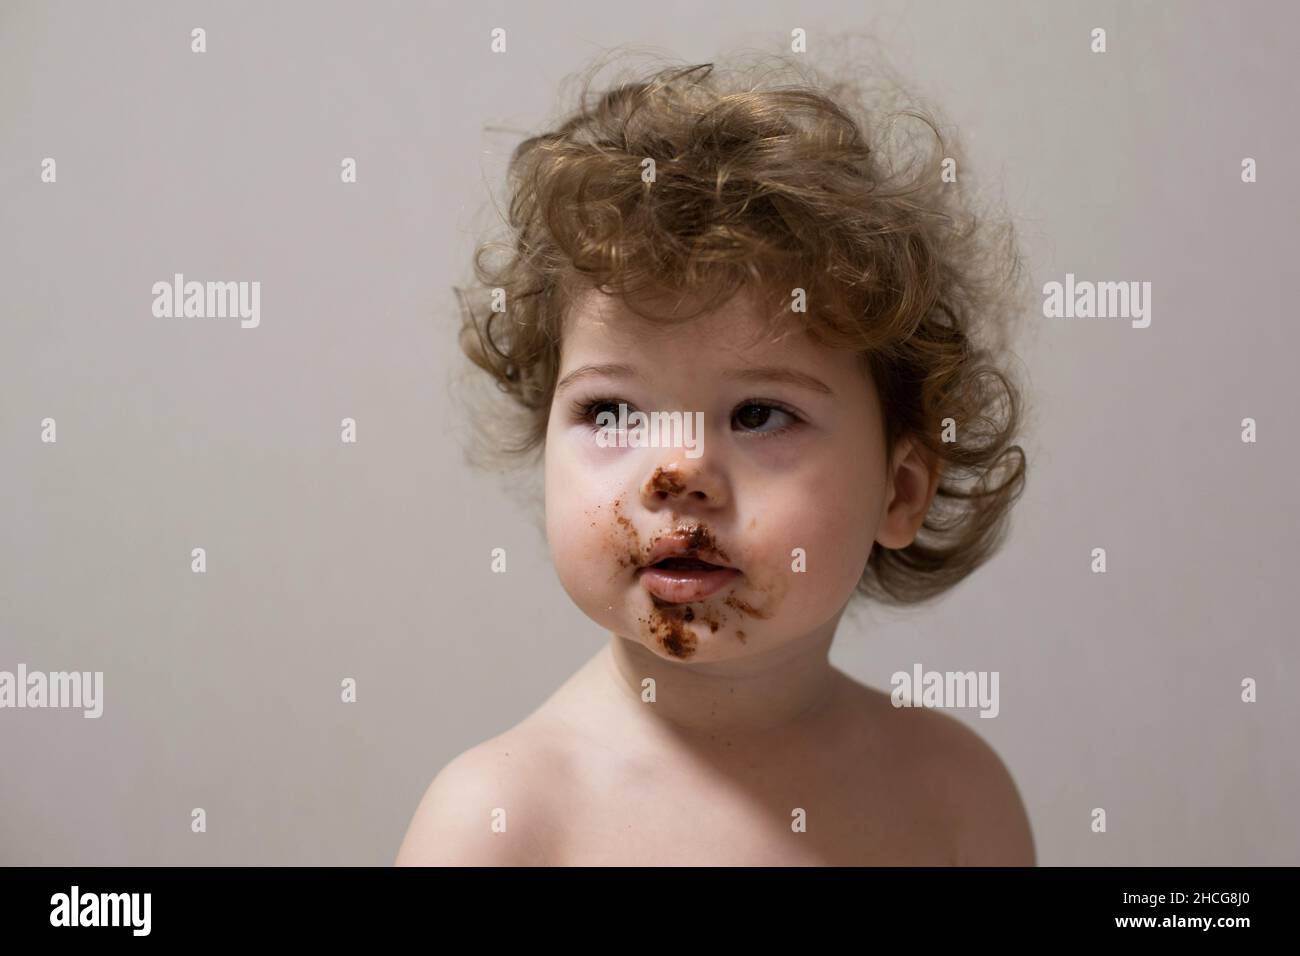 Portrait of a little girl 1 year old, face smeared with chocolate. The child pulled off a chocolate bar and smeared his lips and cheeks. Girl with cur Stock Photo